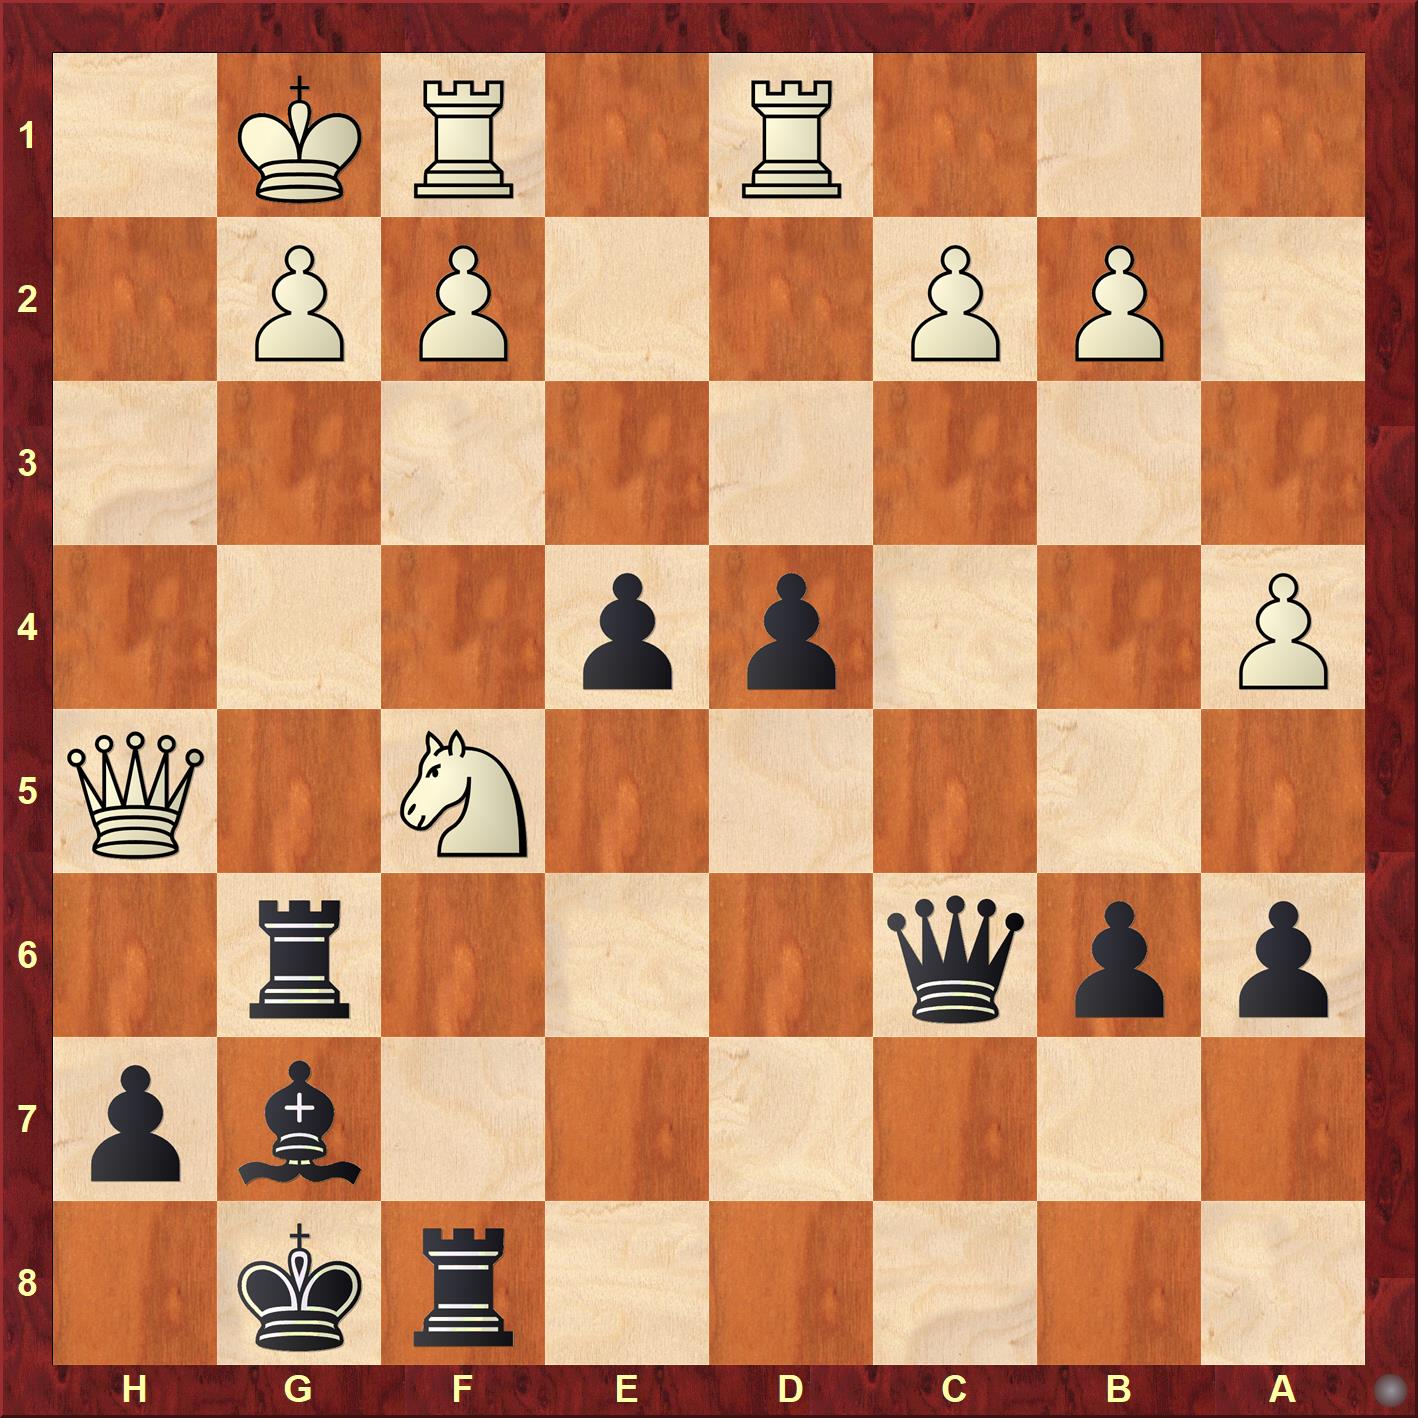 October 2020 Chess Puzzle Answer Key